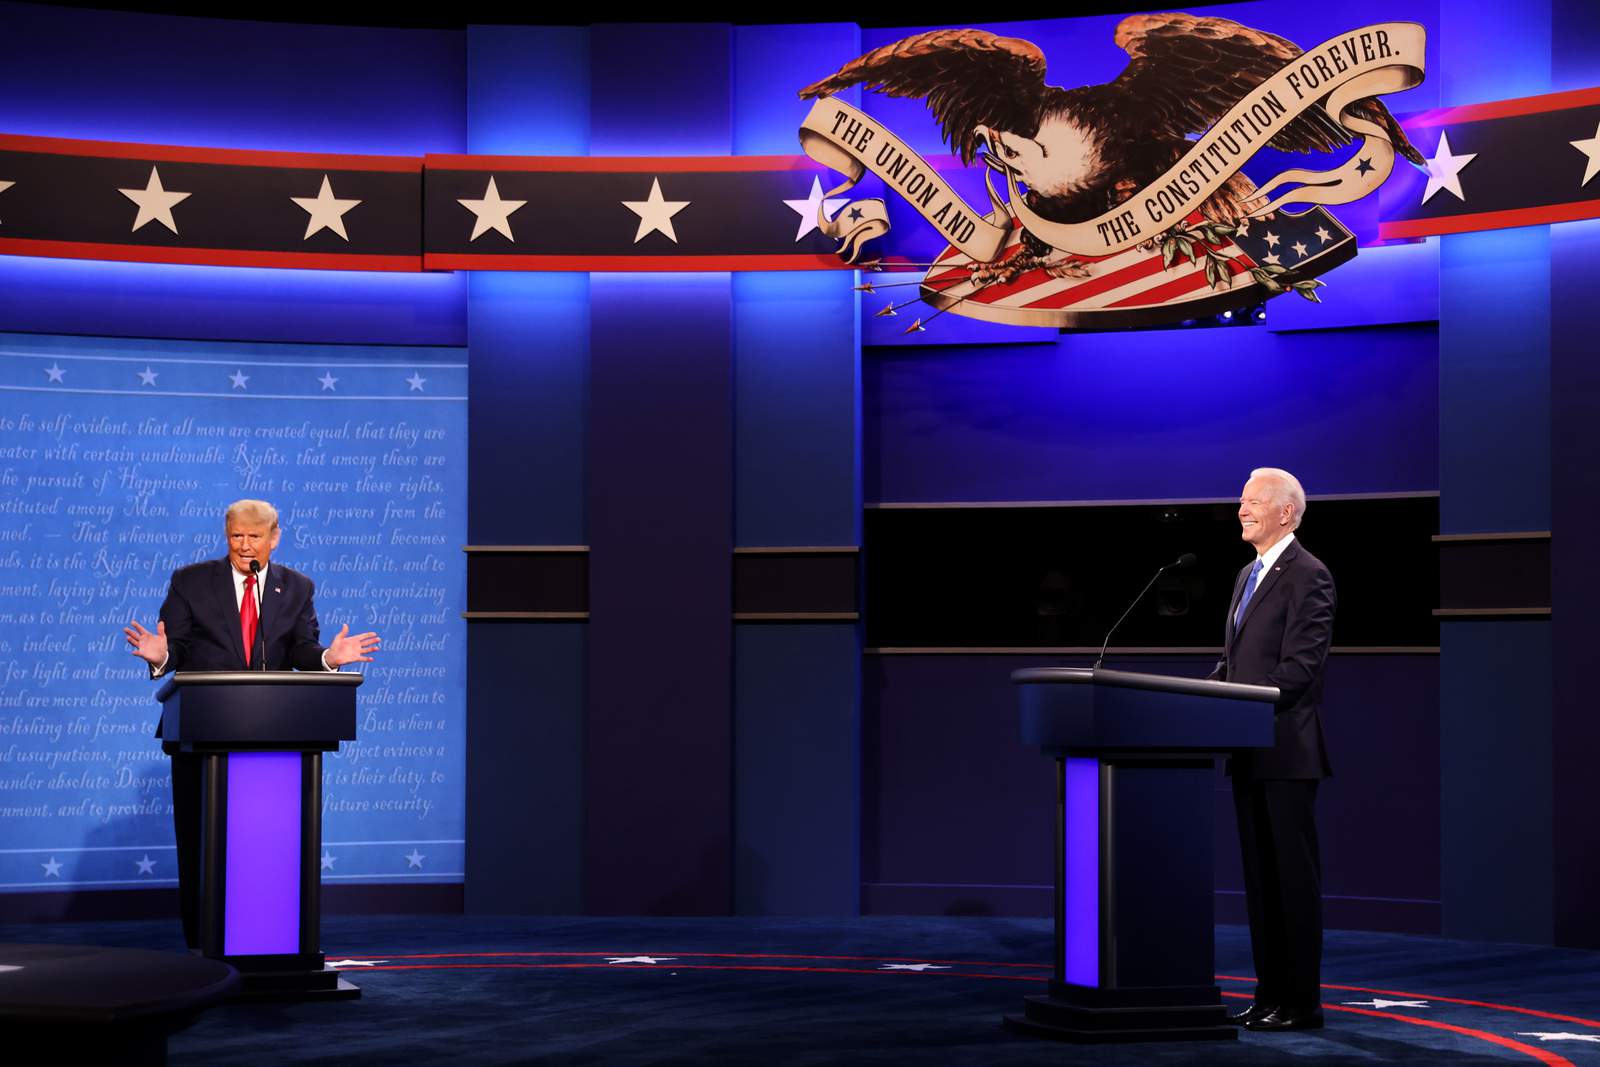 Take our quiz to rate your feelings on the final presidential debate